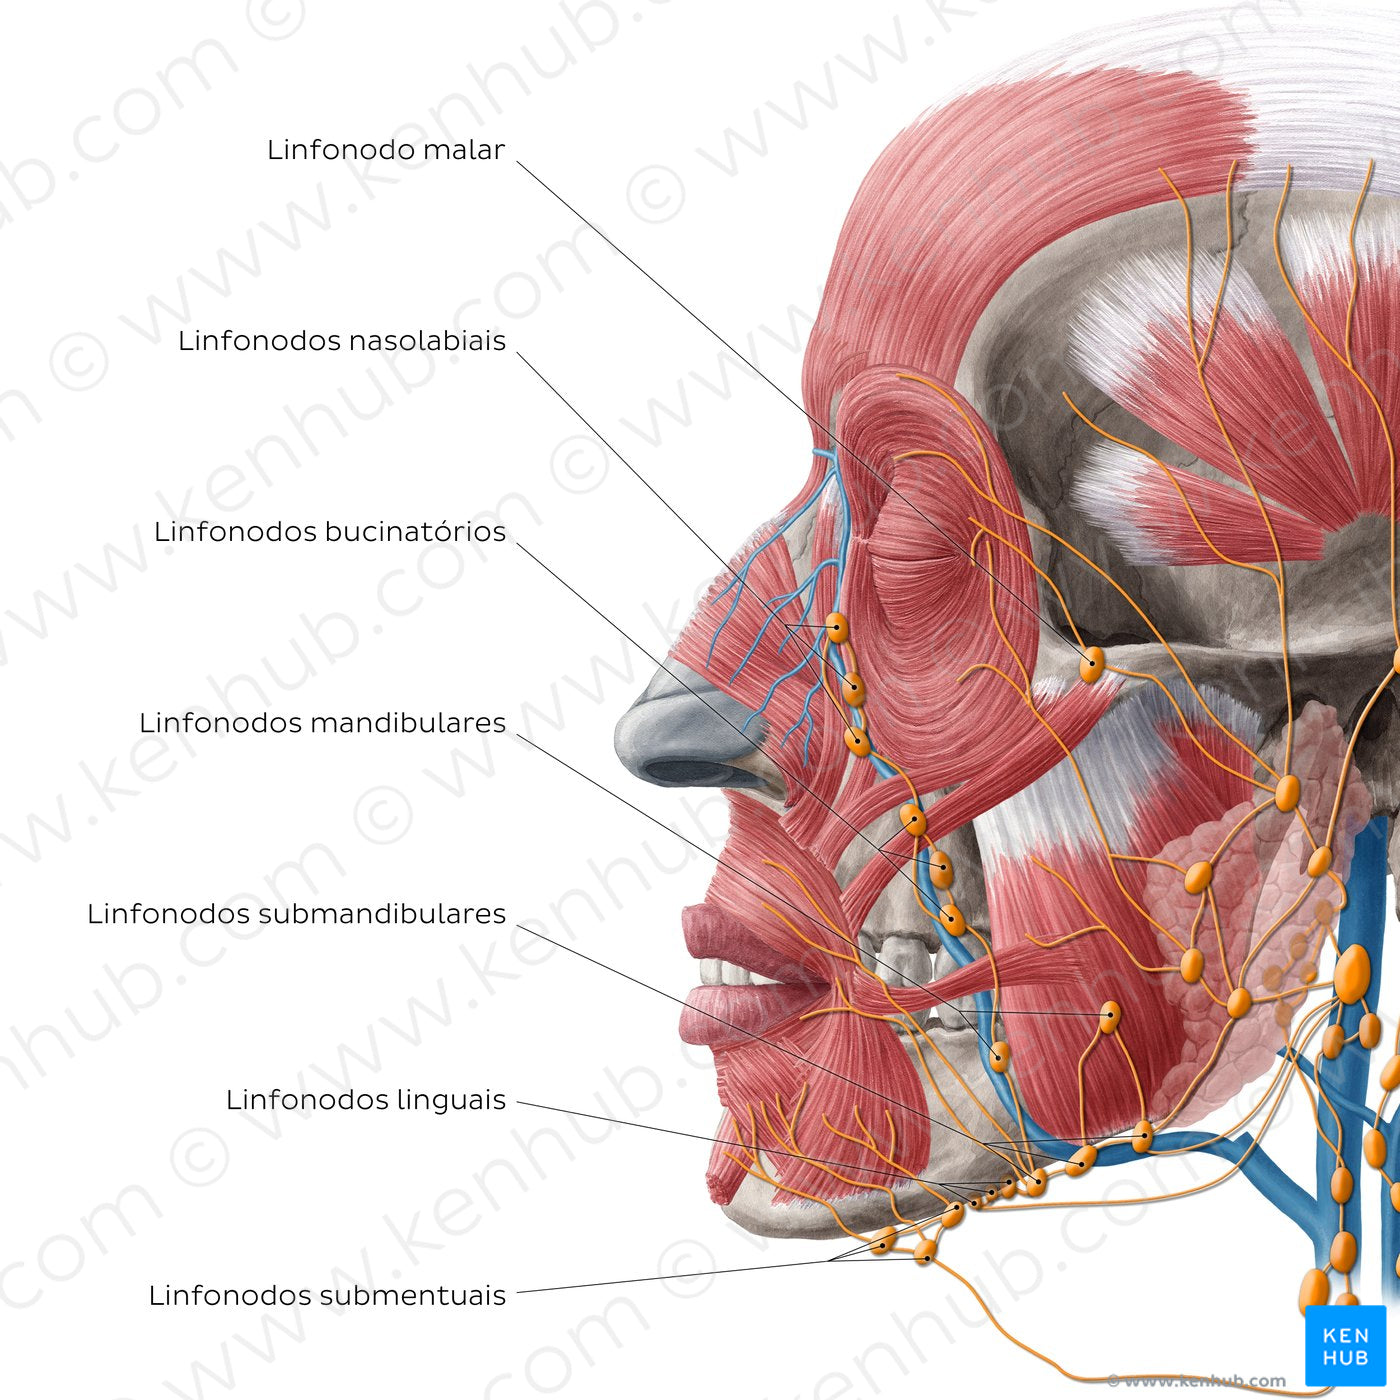 Lymphatics of the head (Lateral) (Portuguese)